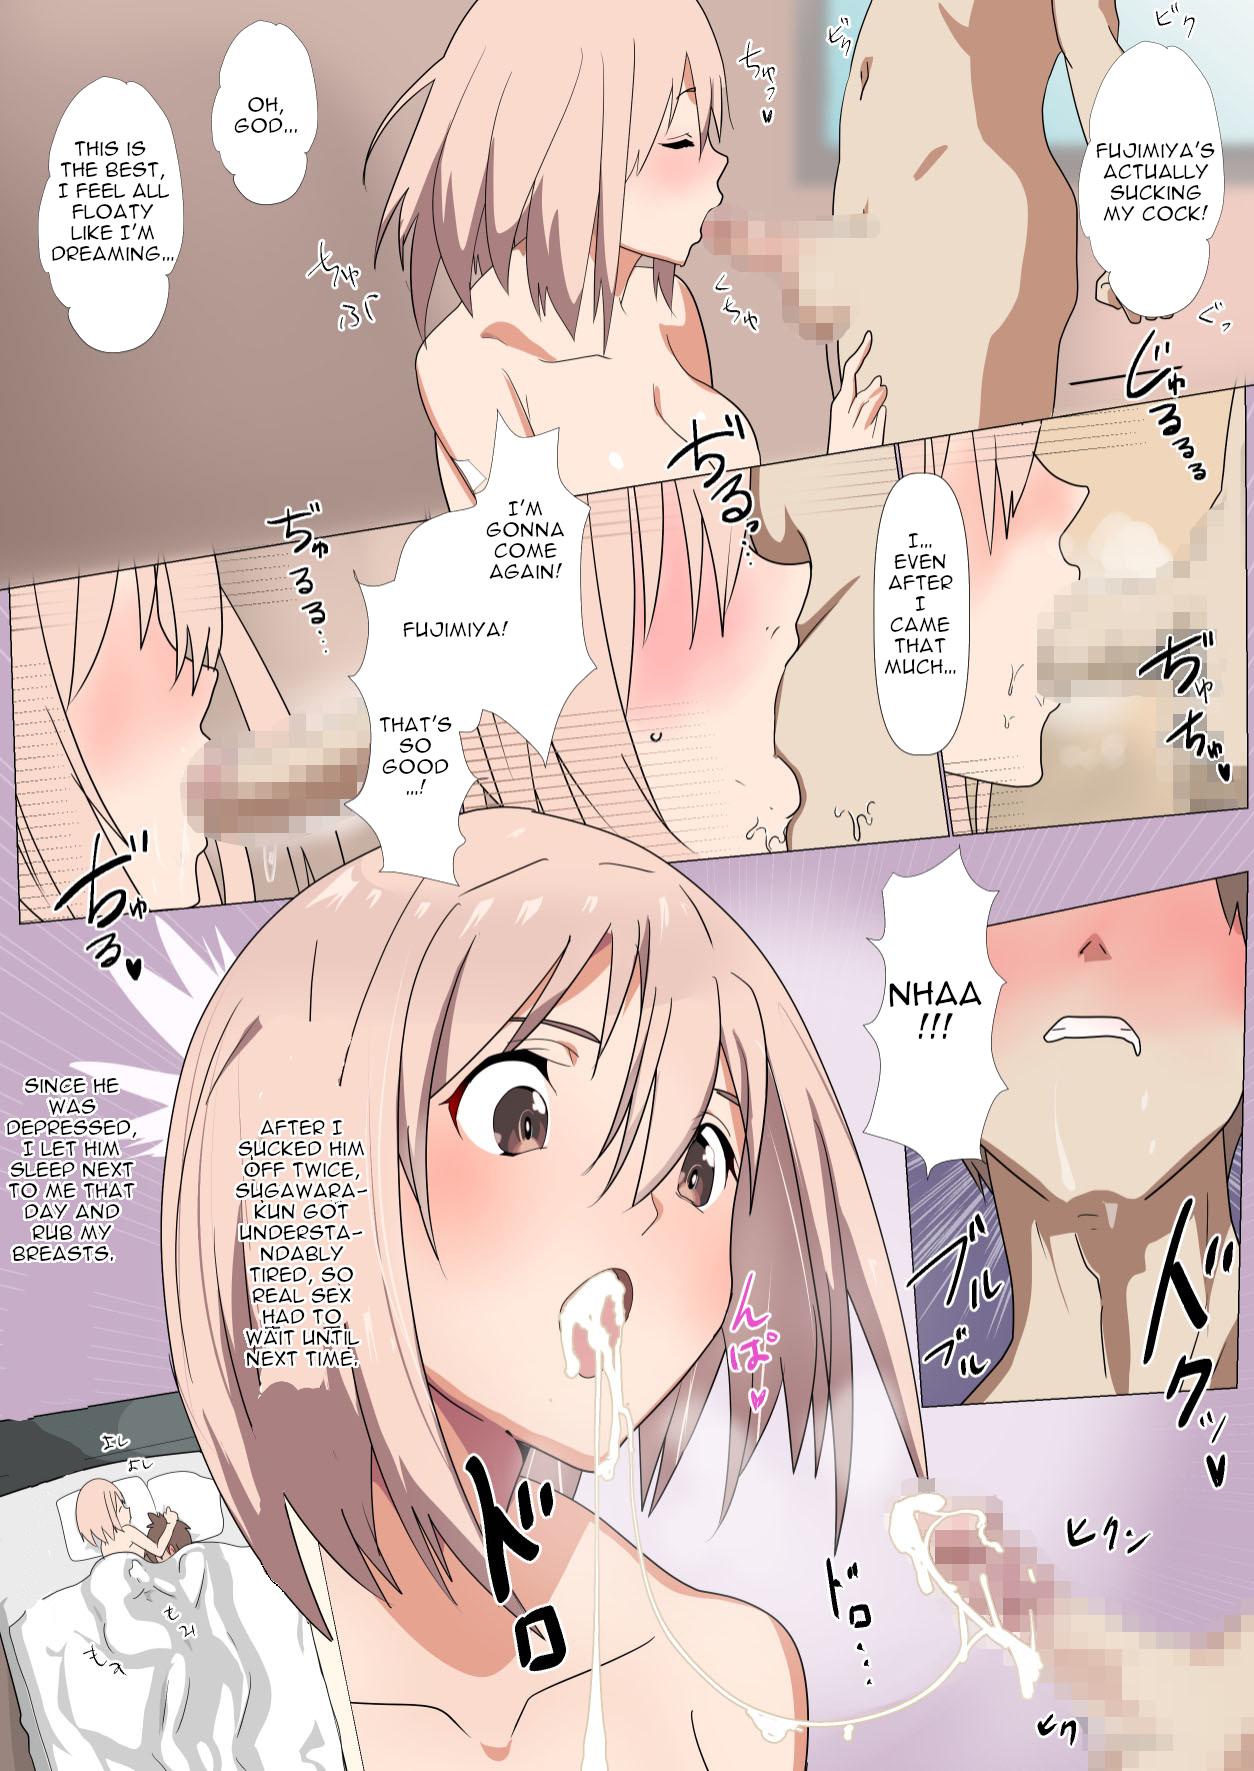 First The Day the Ribbon Fell ~ How I was NTR'd by a Playboy in my Class without My Childhood Friend Knowing - Original Nerd - Page 8